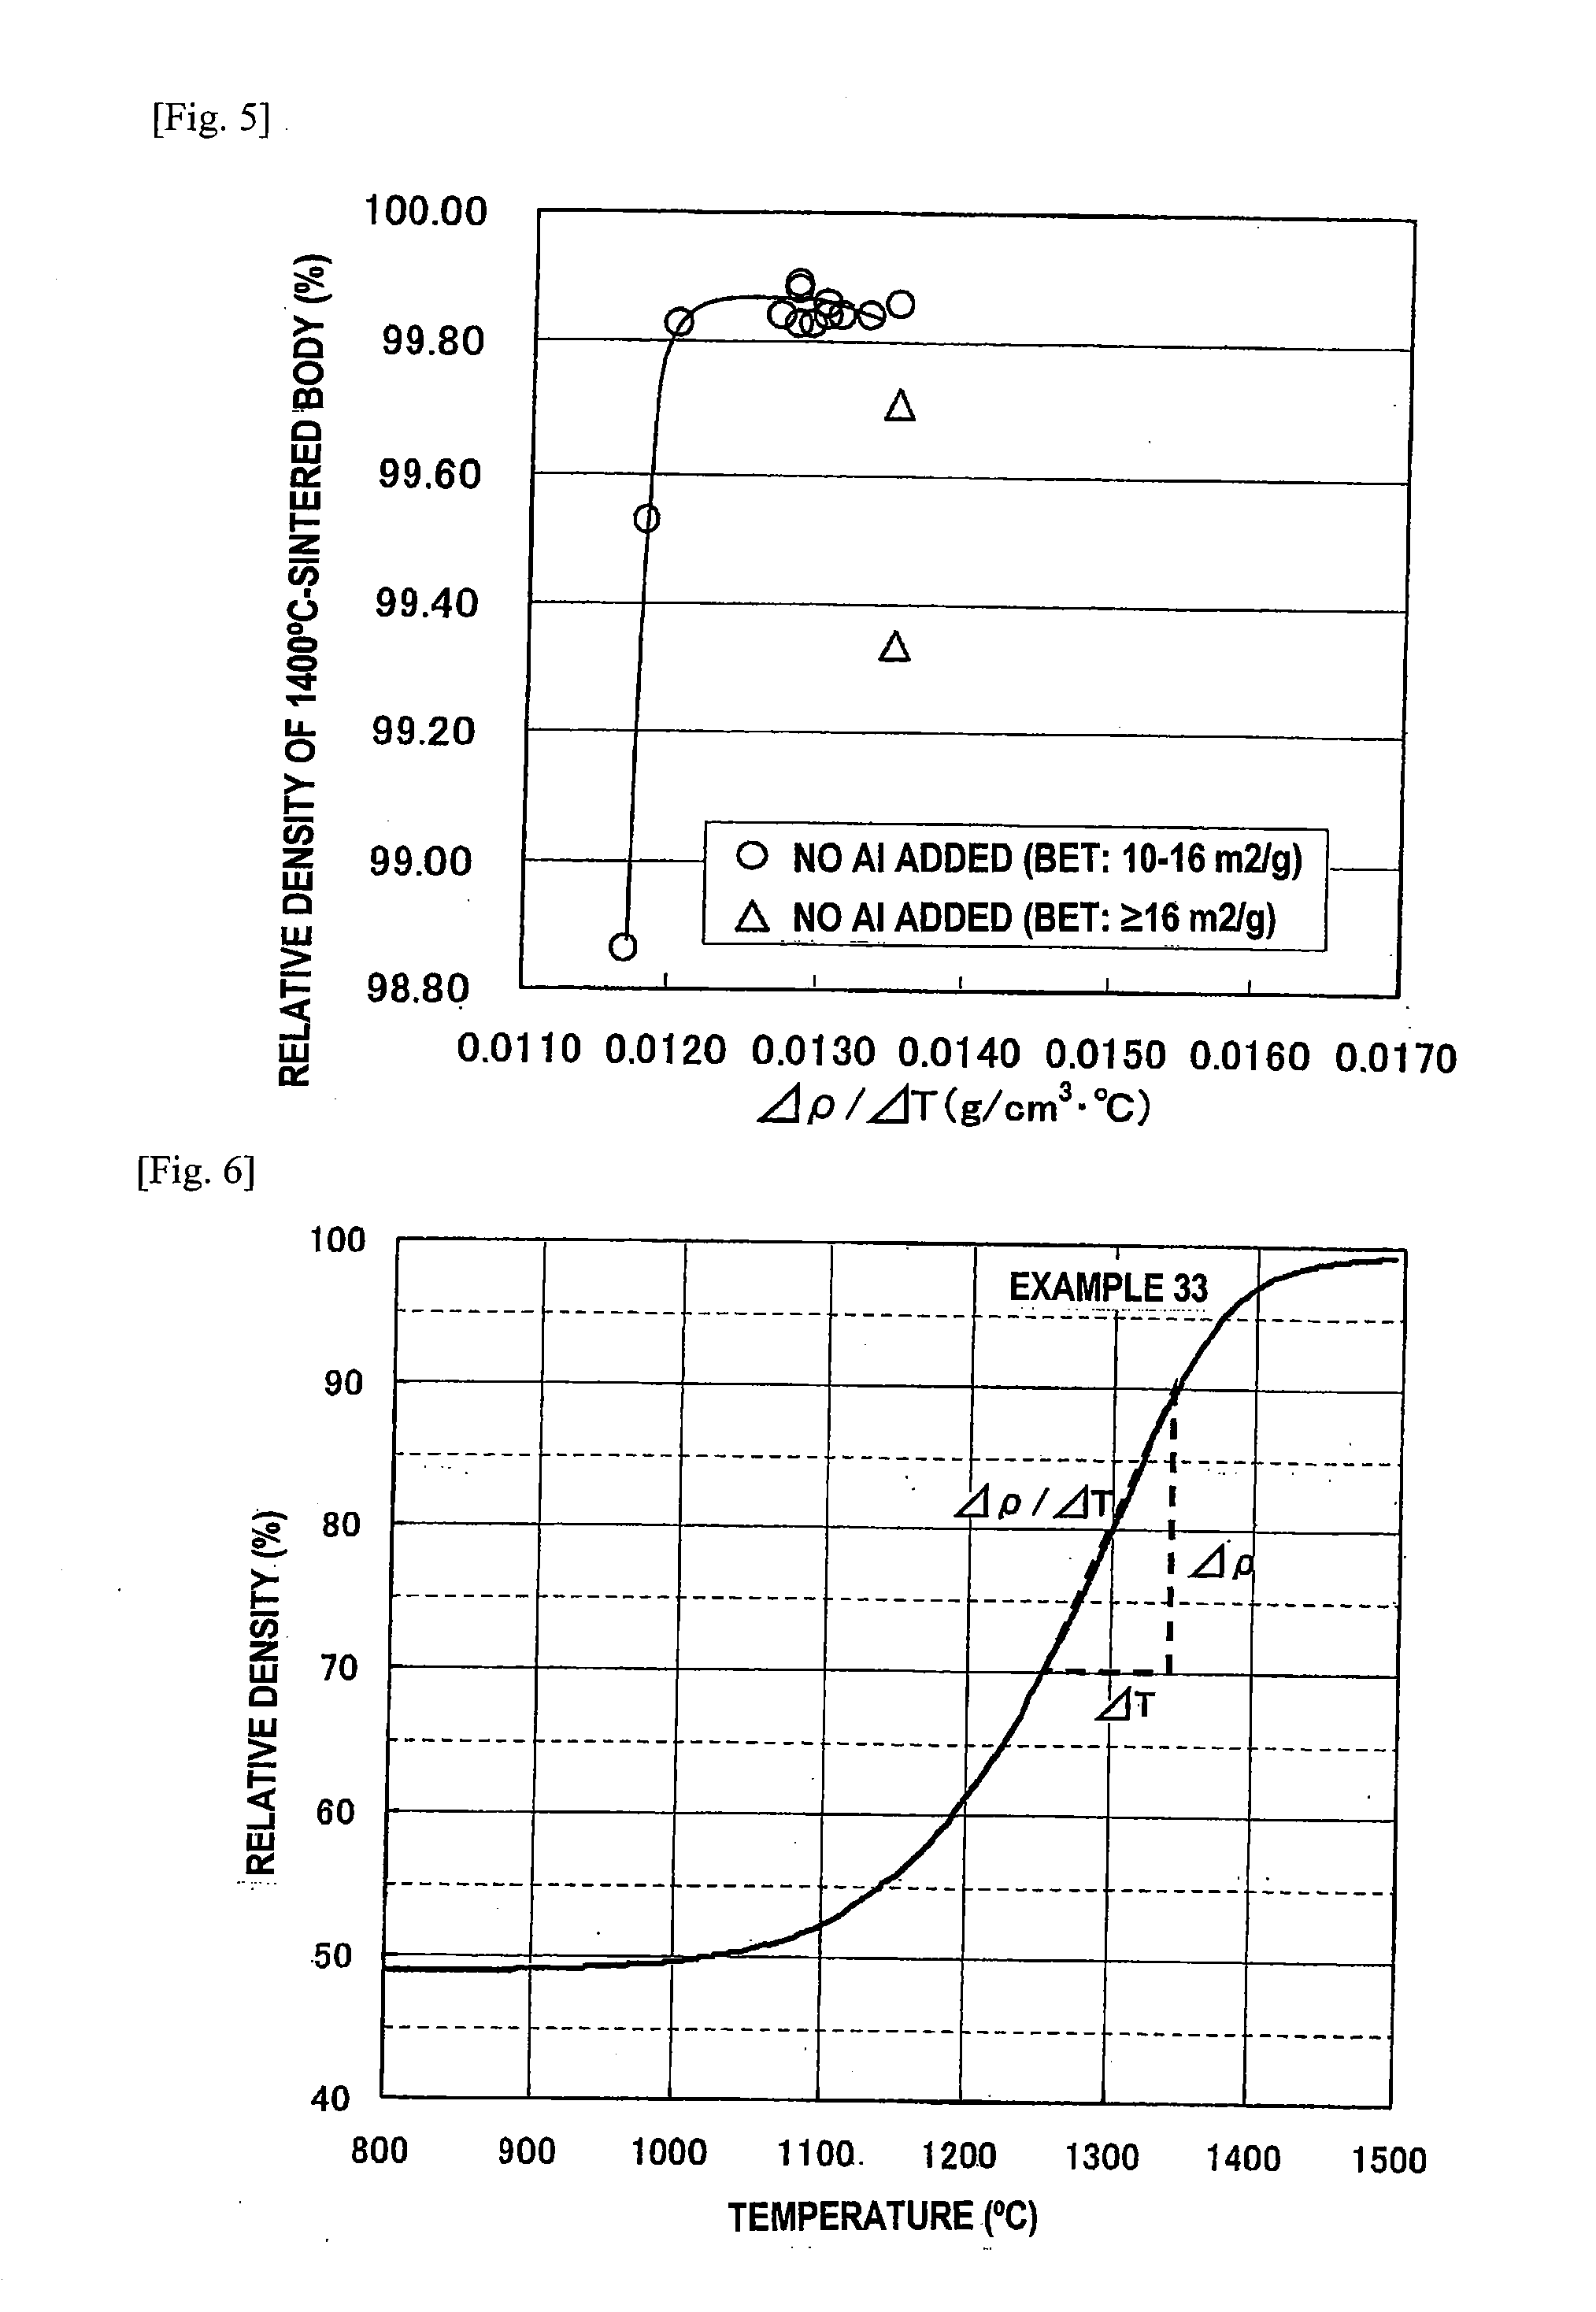 Translucent zirconia sintered body, process for producing the same, and use of the same